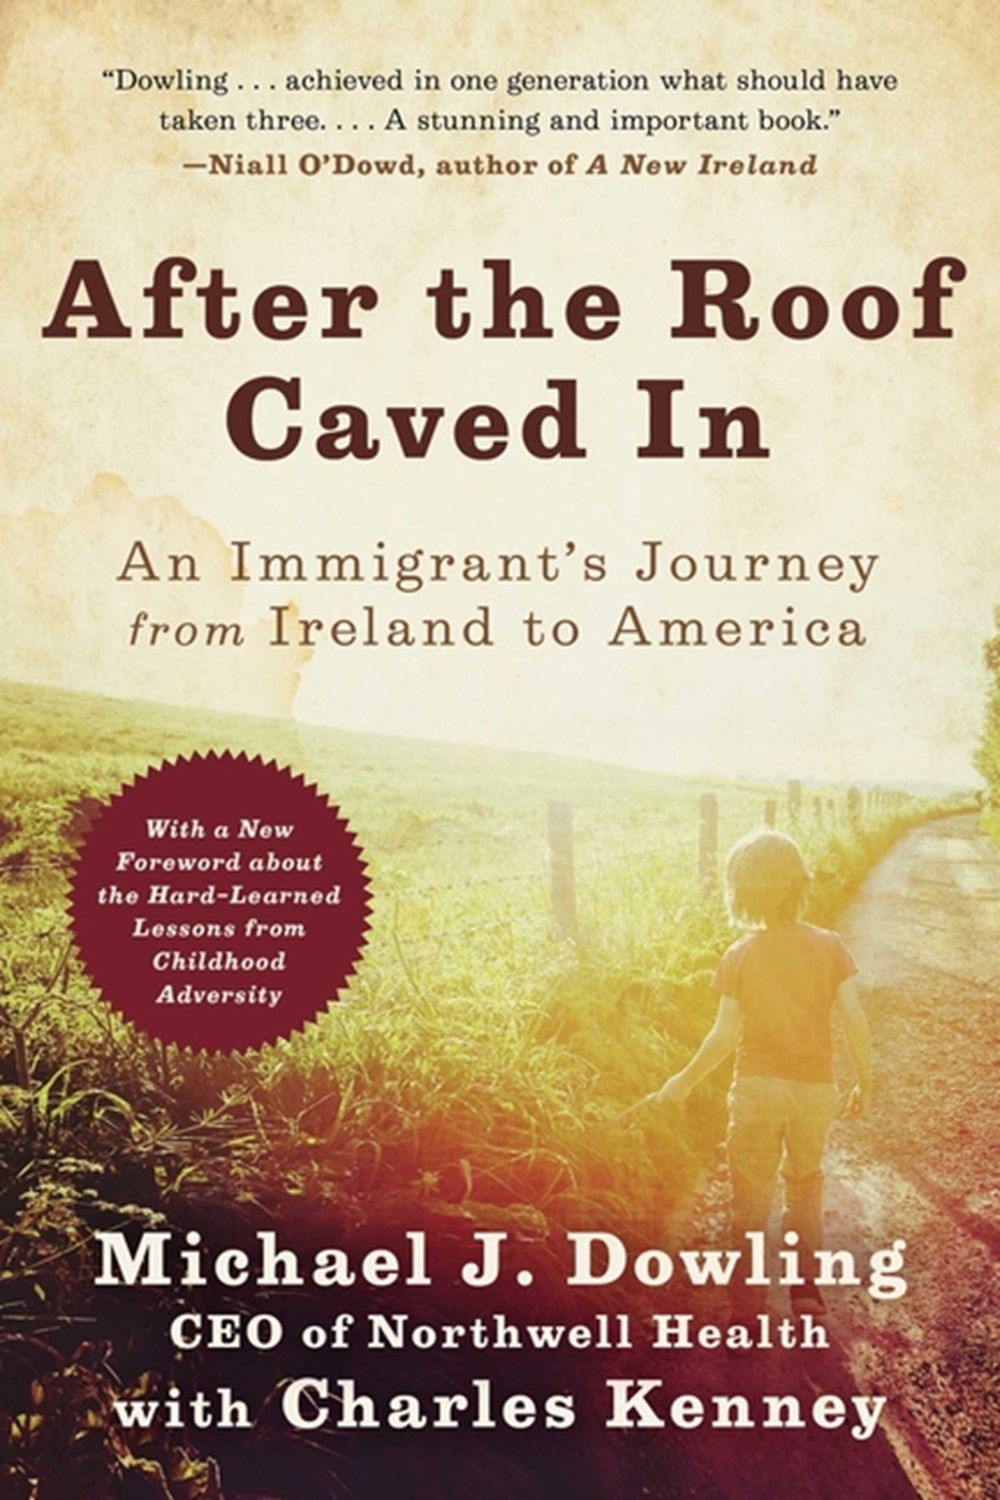 After the Roof Caved in An Immigrant's Journey from Ireland to America